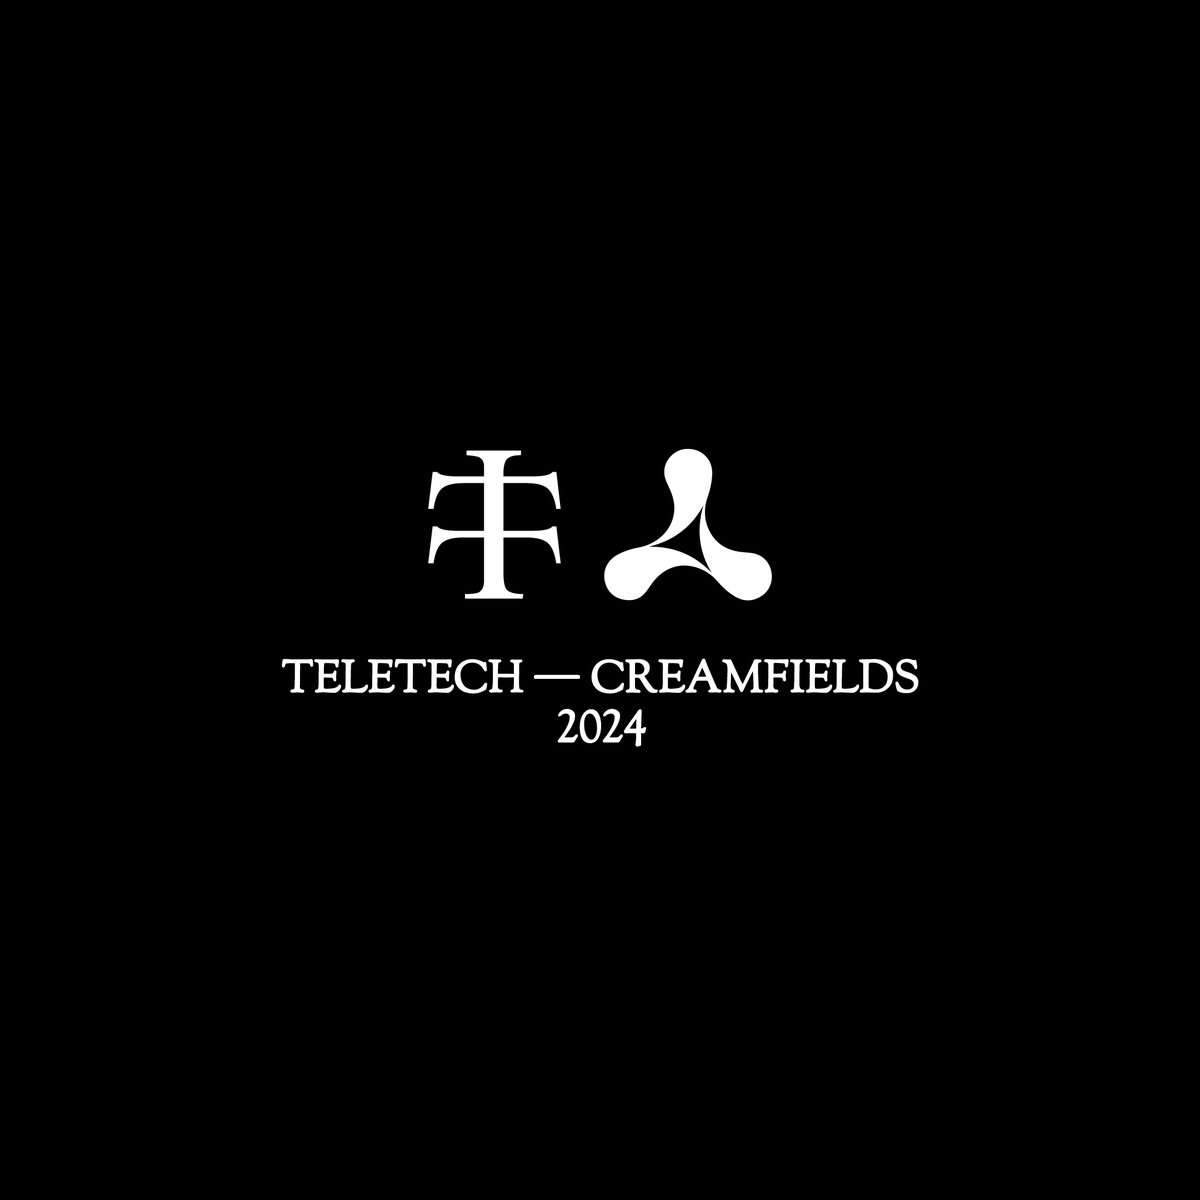 Teletech x Creamfields 2024 Competition and info on instagram.